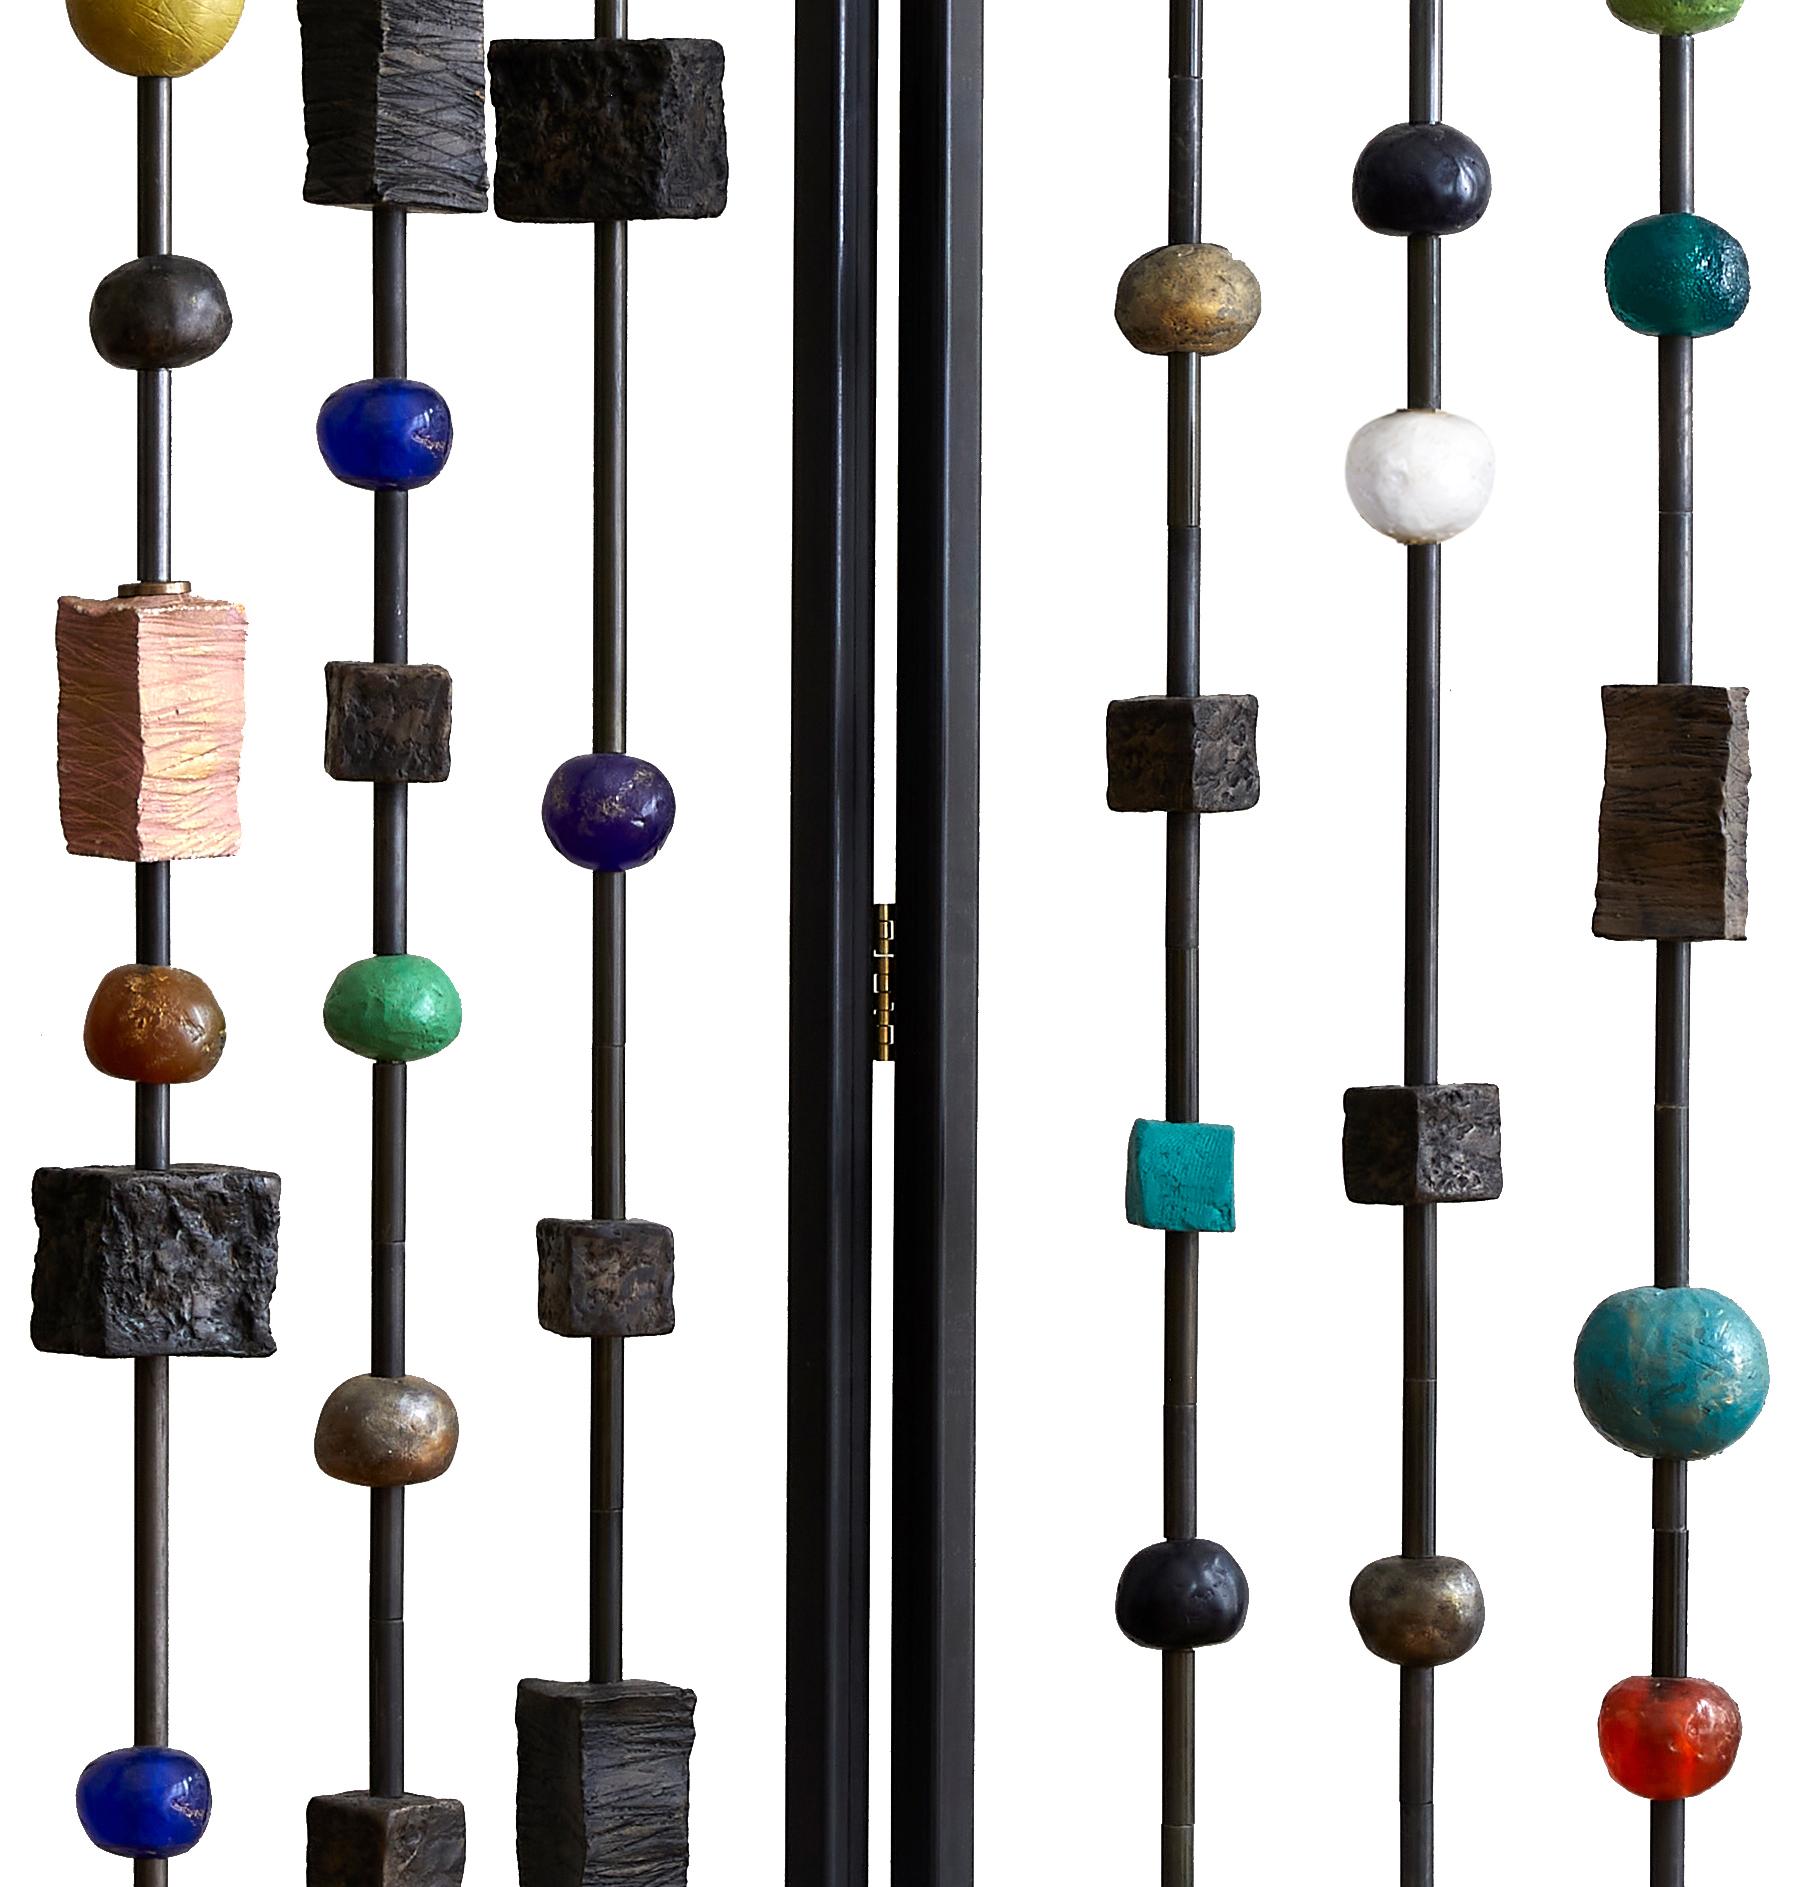 Margit Wittig's triptych blackened metal screen/ room divider features hand-crafted sculptural elements. These pieces can rotate allowing the collector to create varying levels of opaqueness and look of the divider spanning the gamit from full